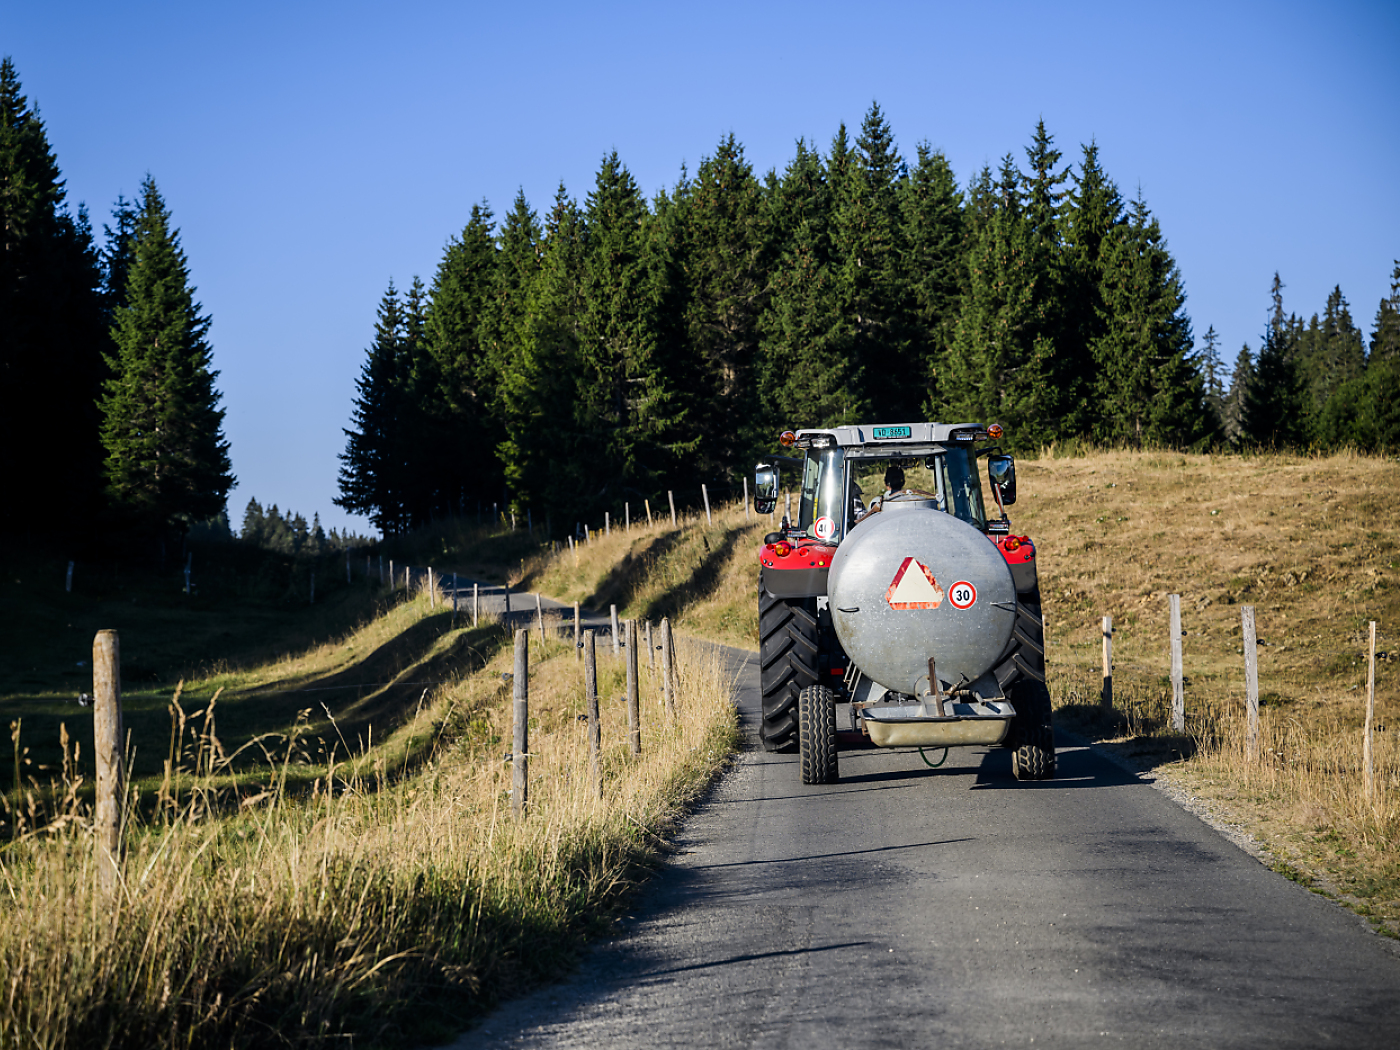 Twelve people died in agricultural accidents in Switzerland